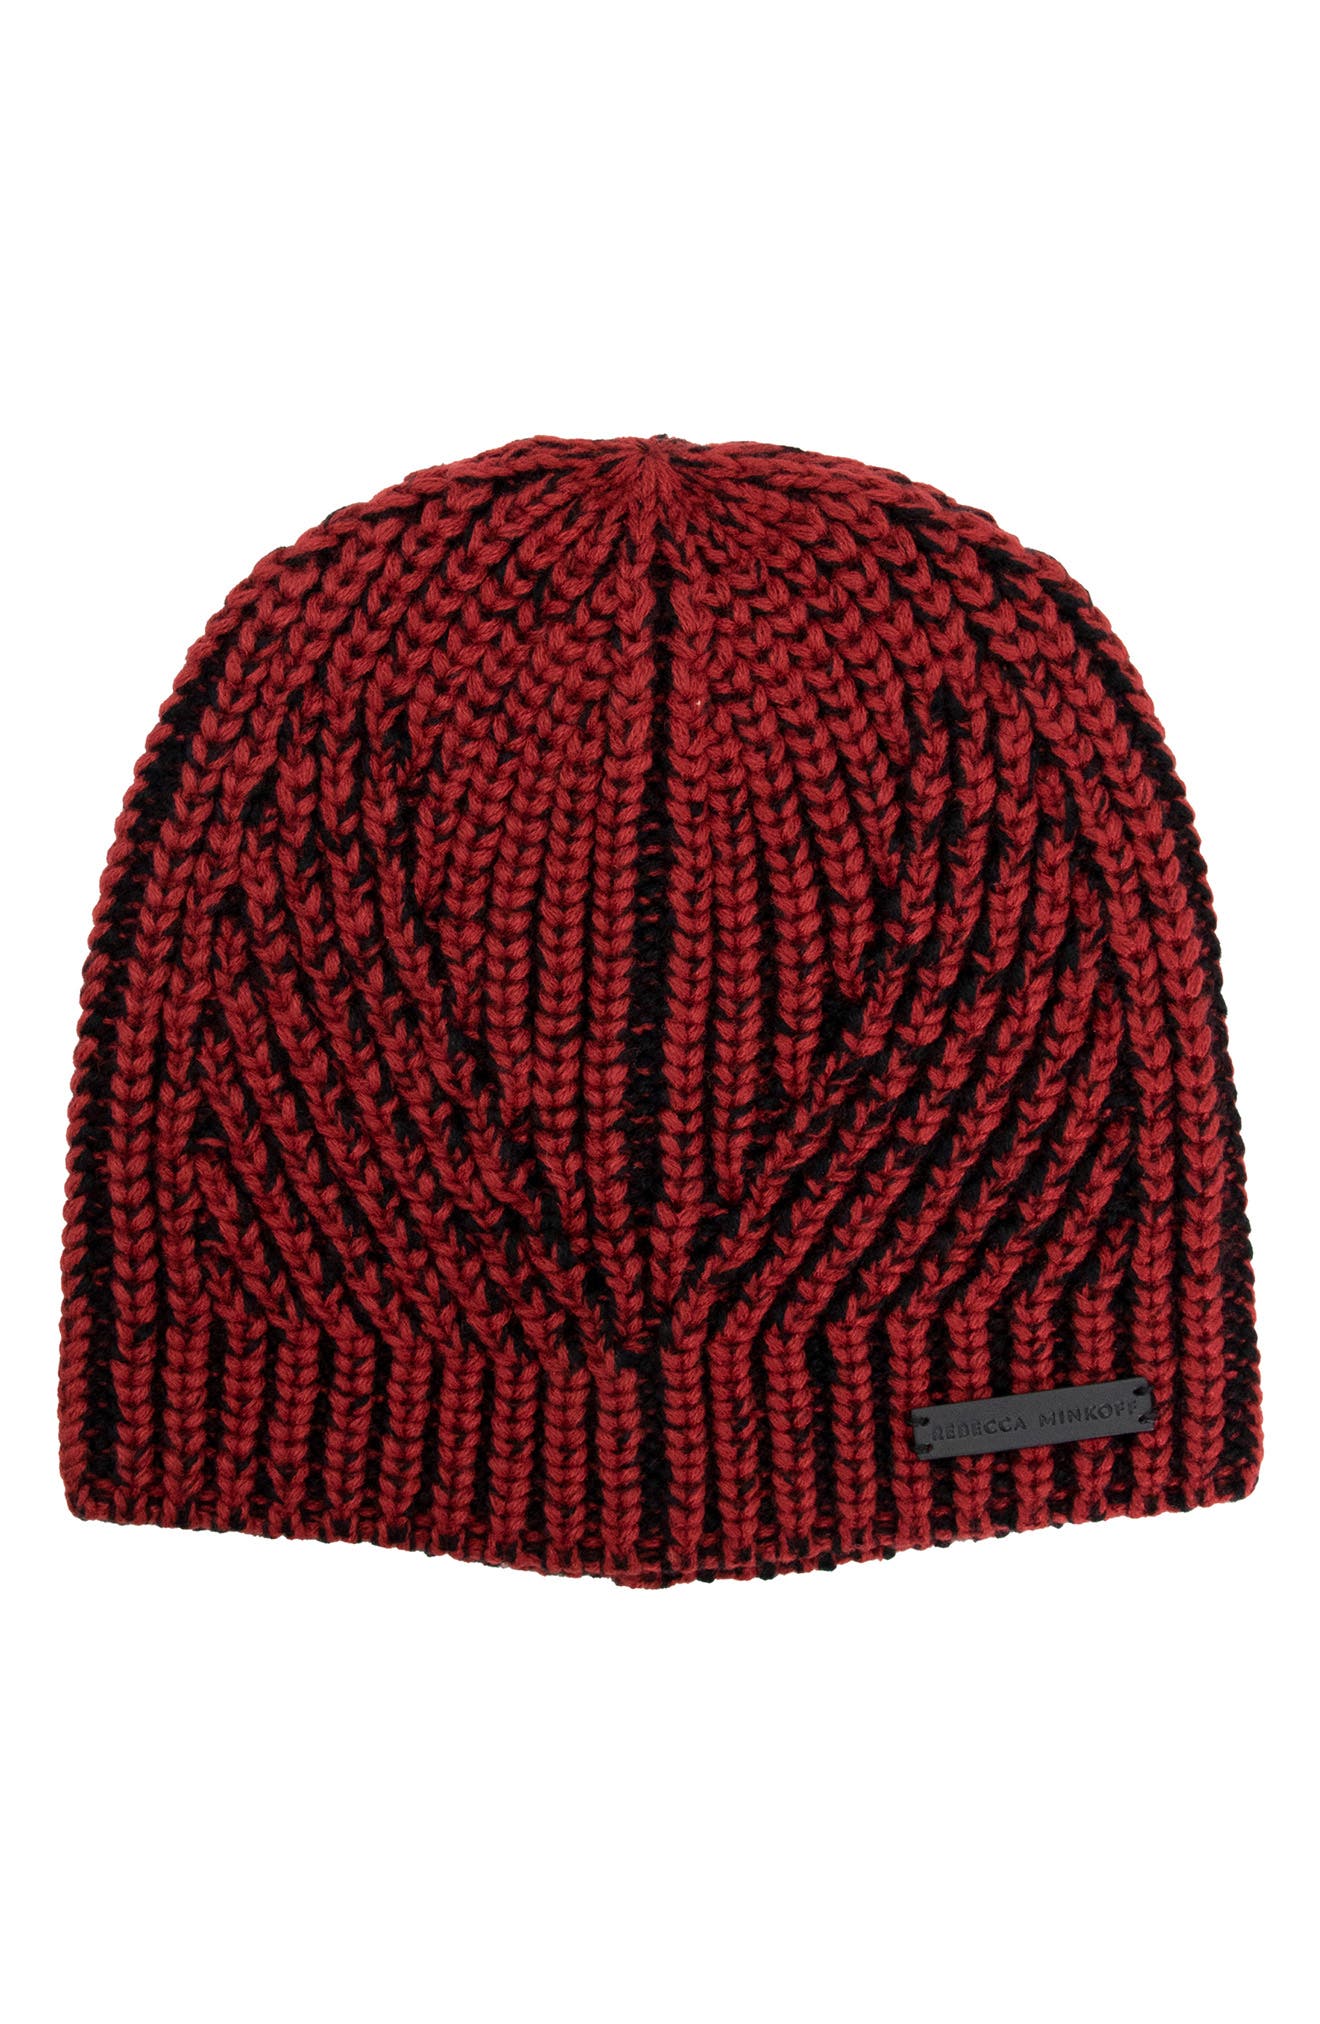 Rebecca Minkoff Two-Tone Rib Beanie in Red Dahlia at Nordstrom